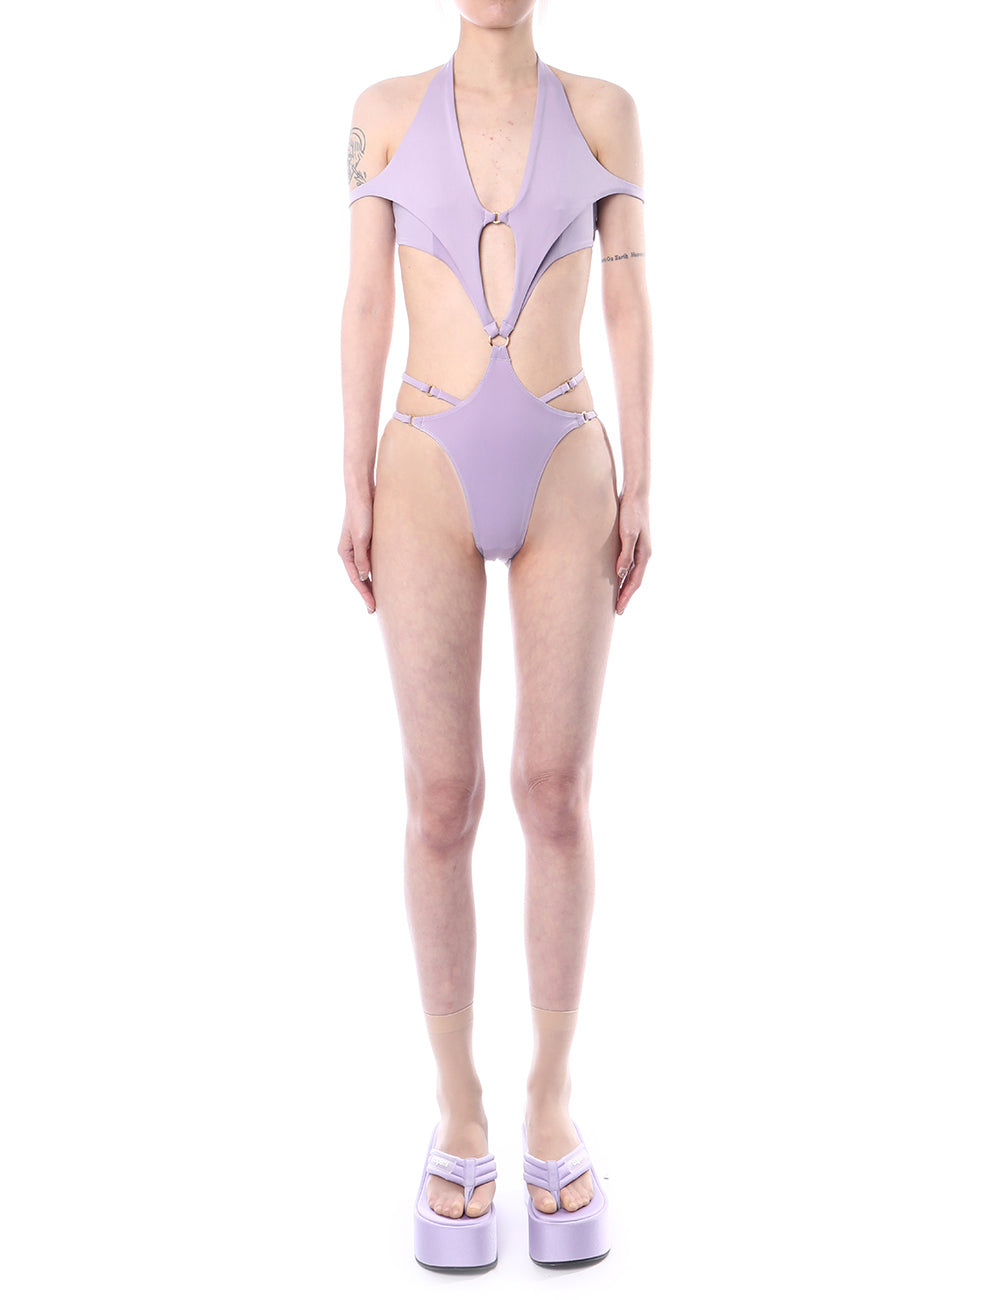 RoomSERVICE x Shyness exclusive Lilac Bat Swimsuit